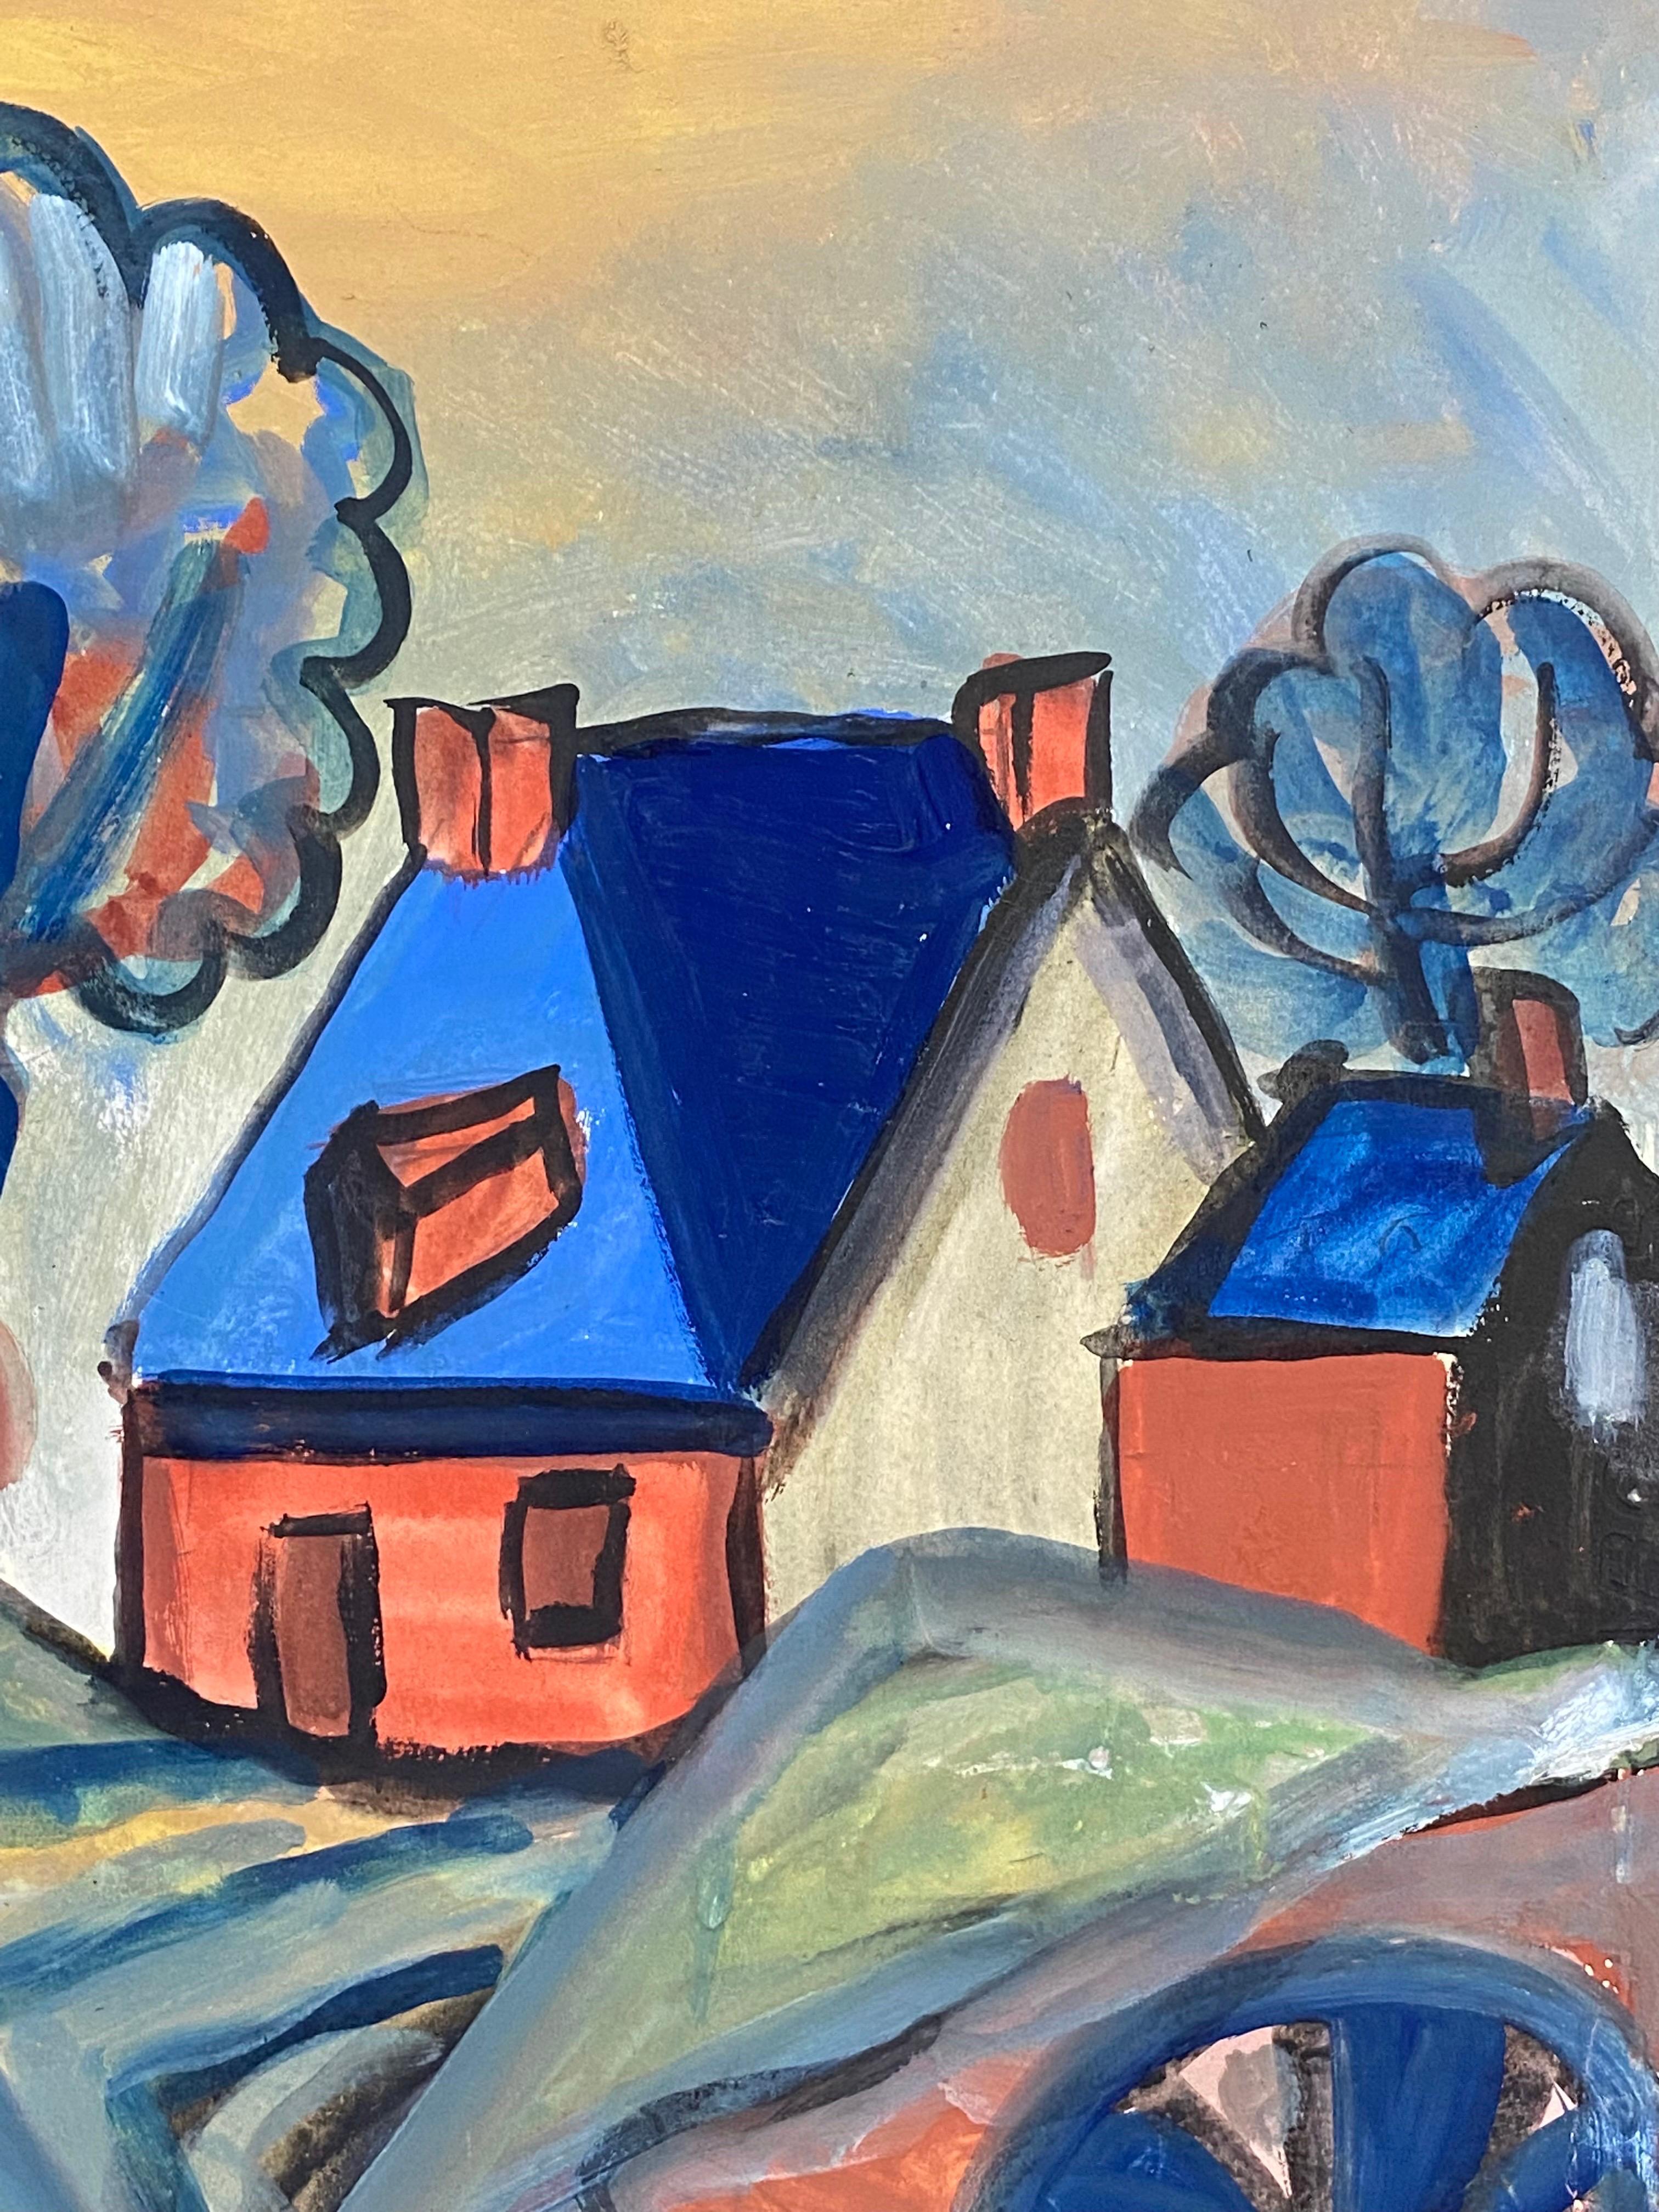 Artist/ School: French school

Title: Abstract Village

Medium: gouache painting on paper, unframed 

canvas: 14 x 12 inches

Provenance: private collection, France

Condition: The painting is in overall very good and sound condition

 